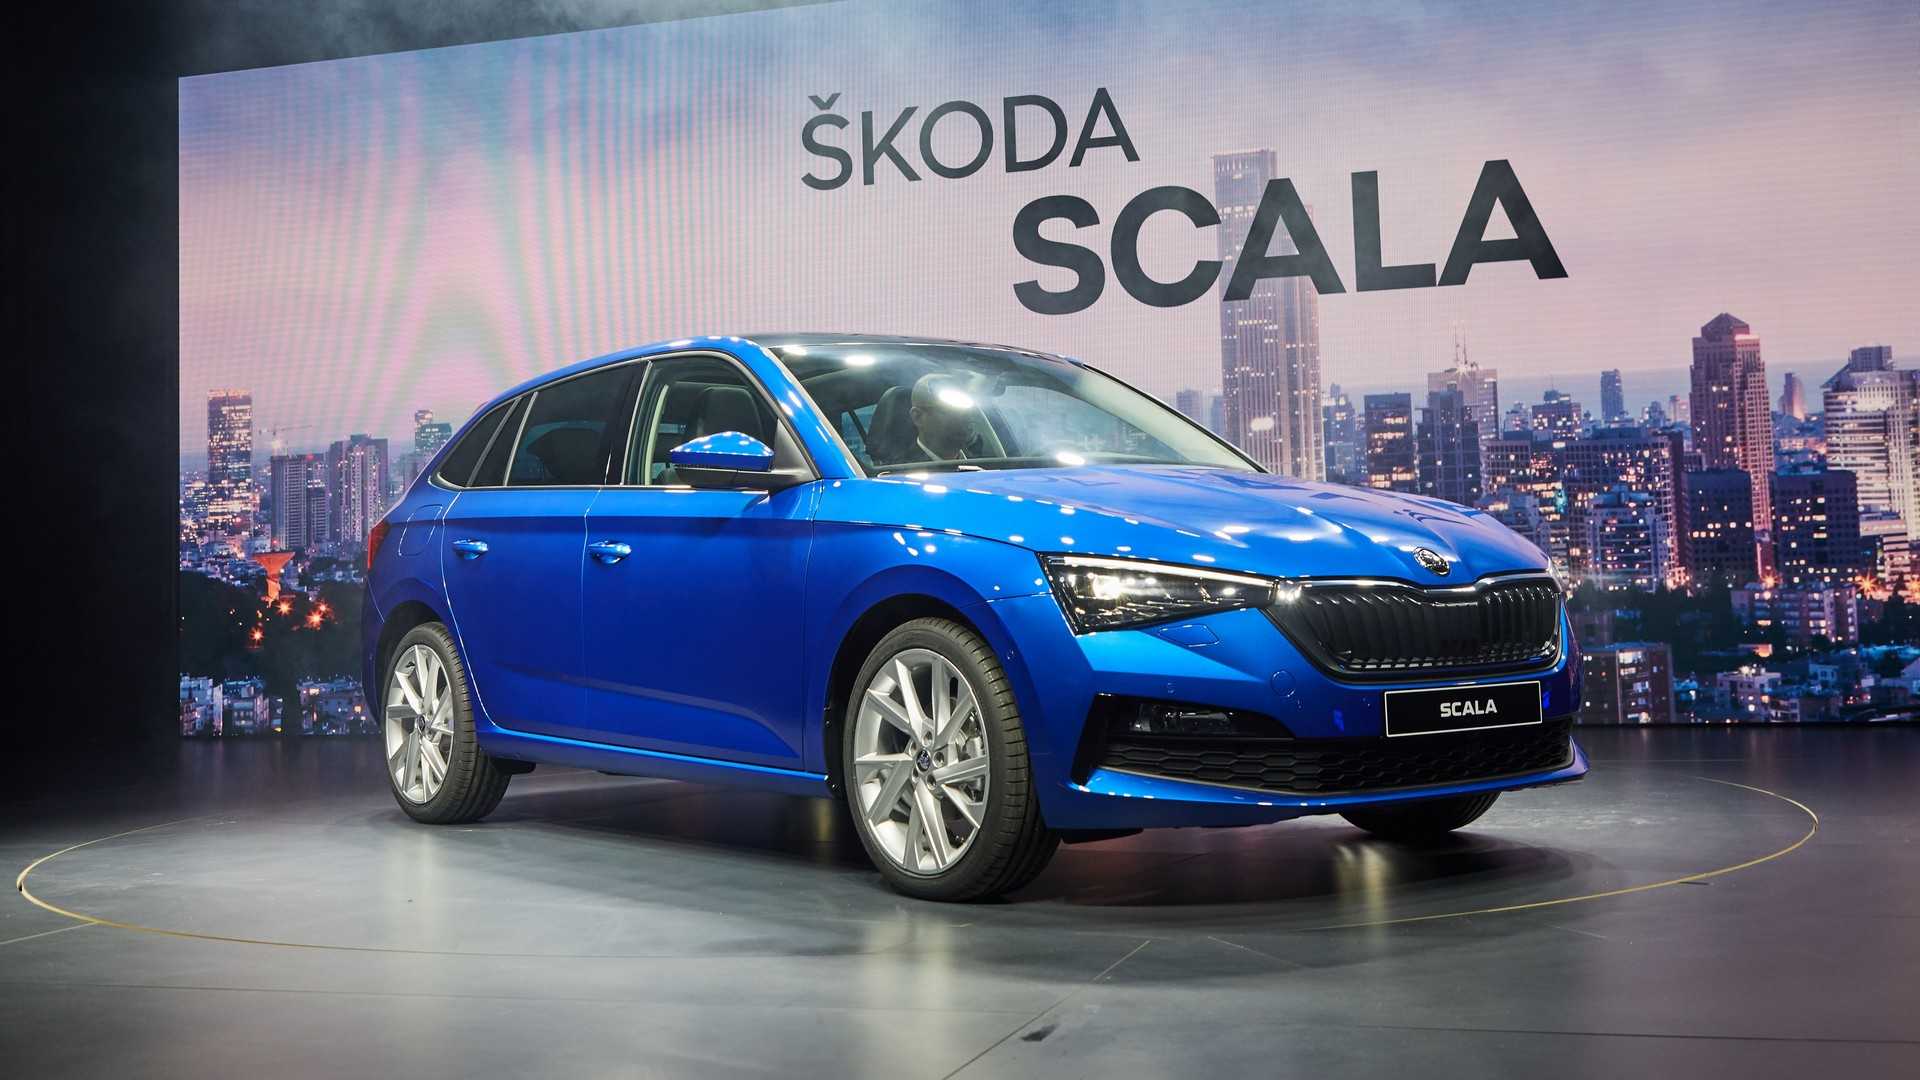 Skoda Scala Revealed To Rival VW Golf And Ford Focus